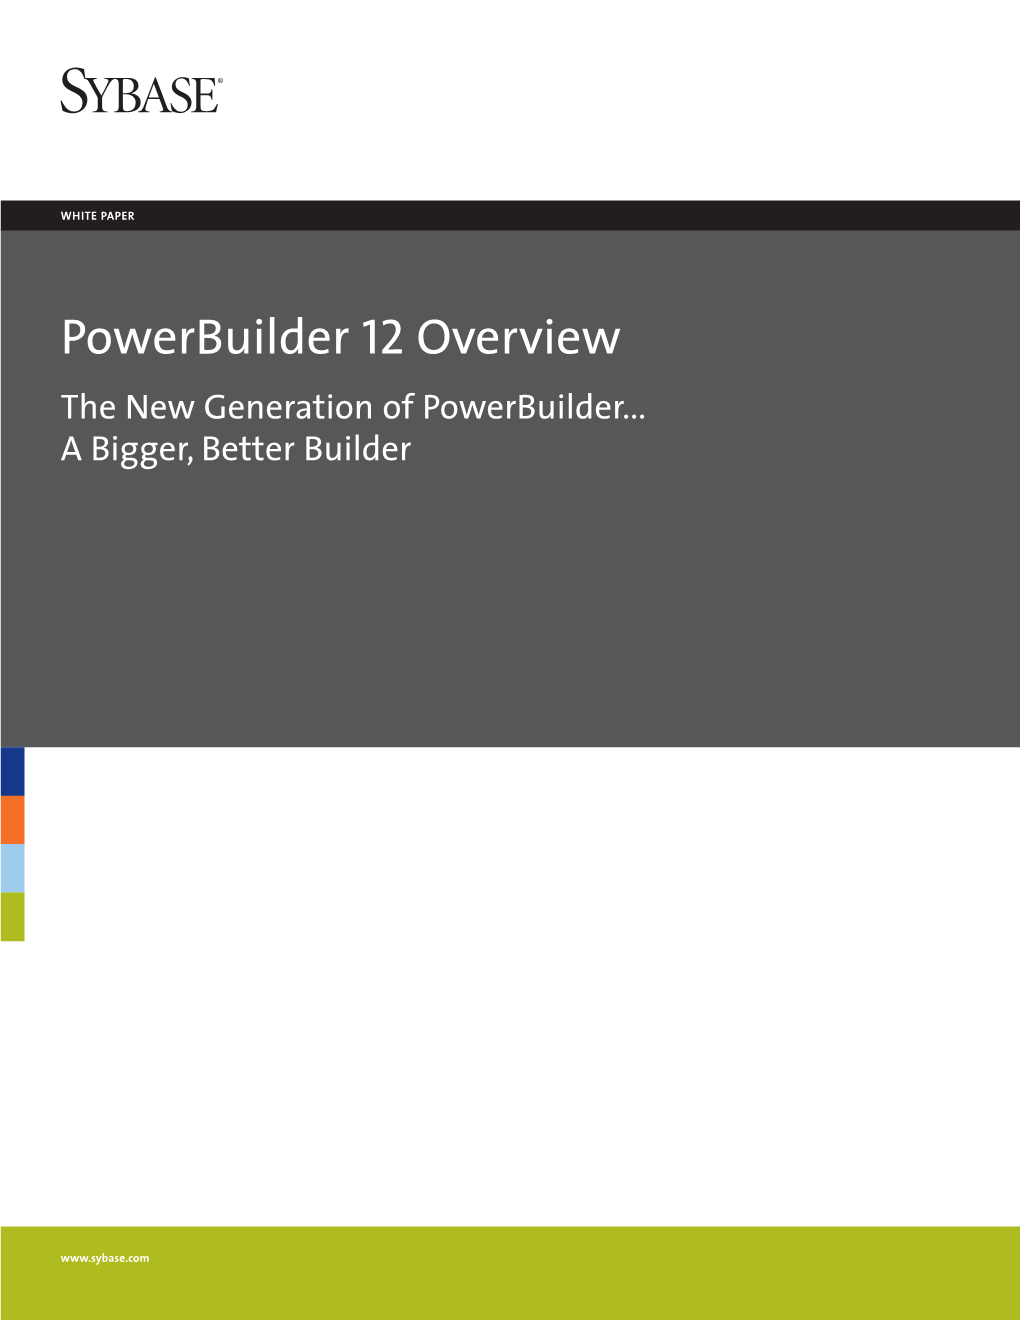 Powerbuilder 12 Overview: the New Generation of Powerbuilder...A